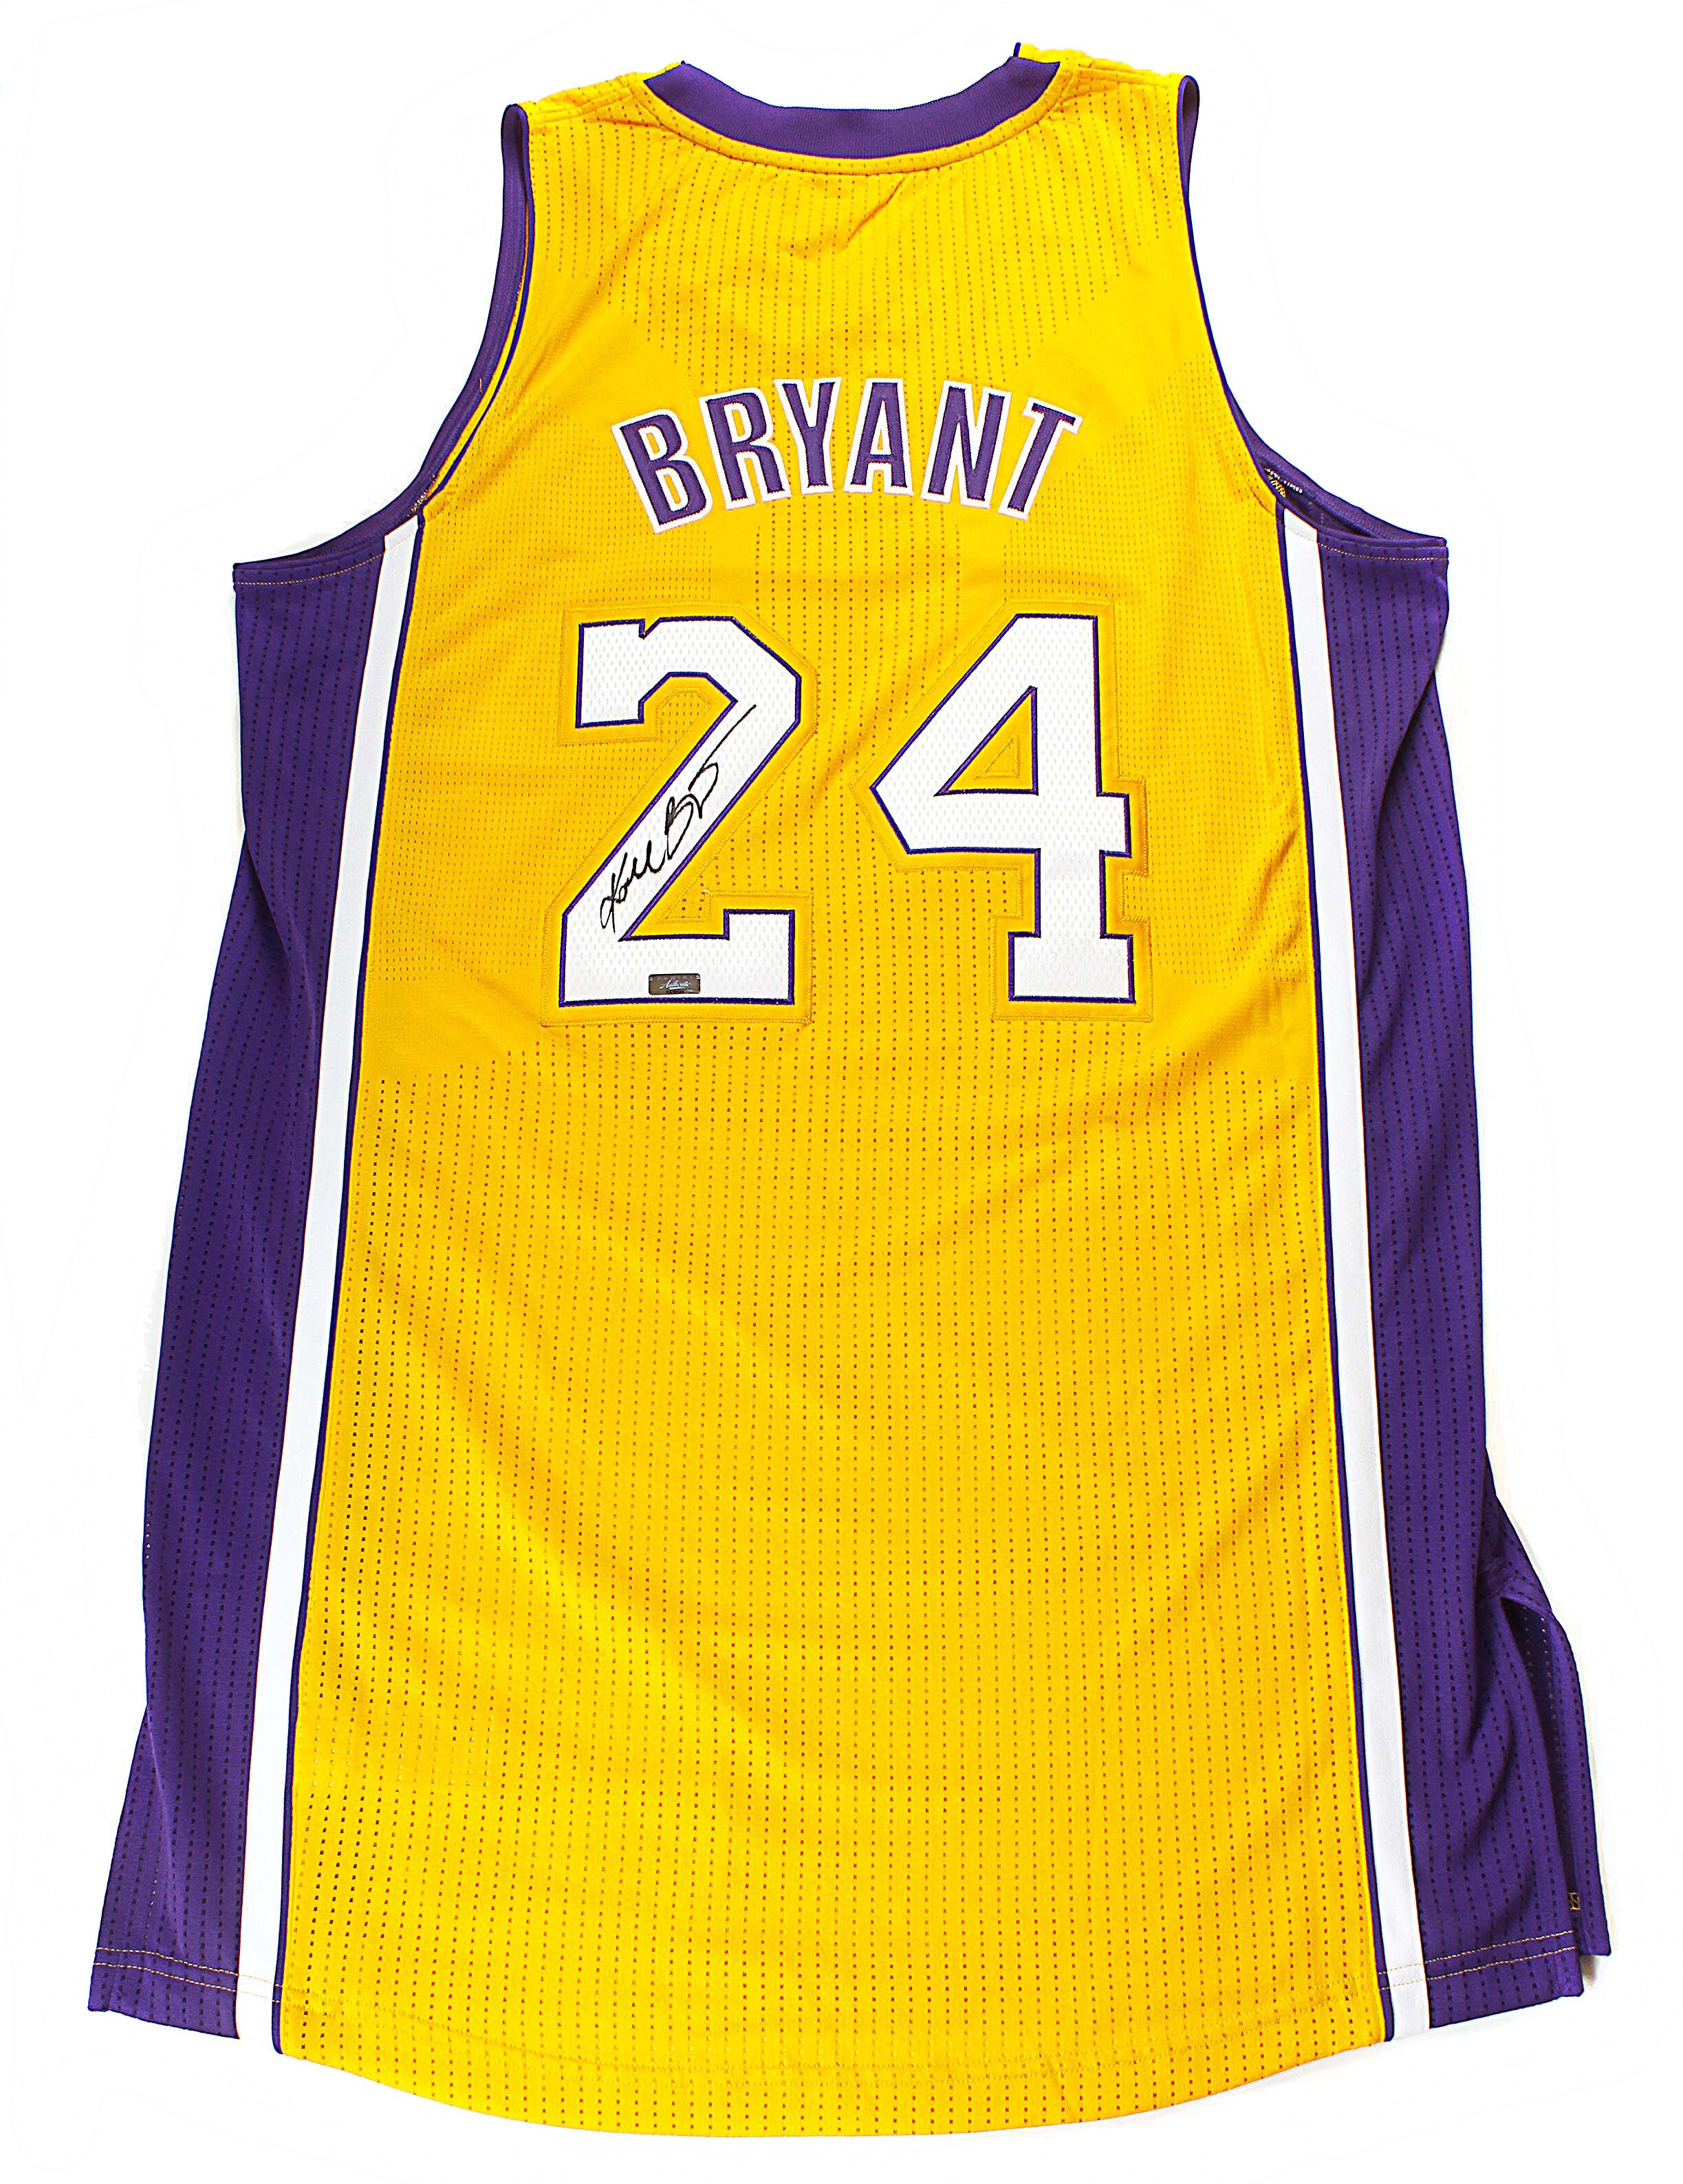 how much does a kobe bryant jersey cost